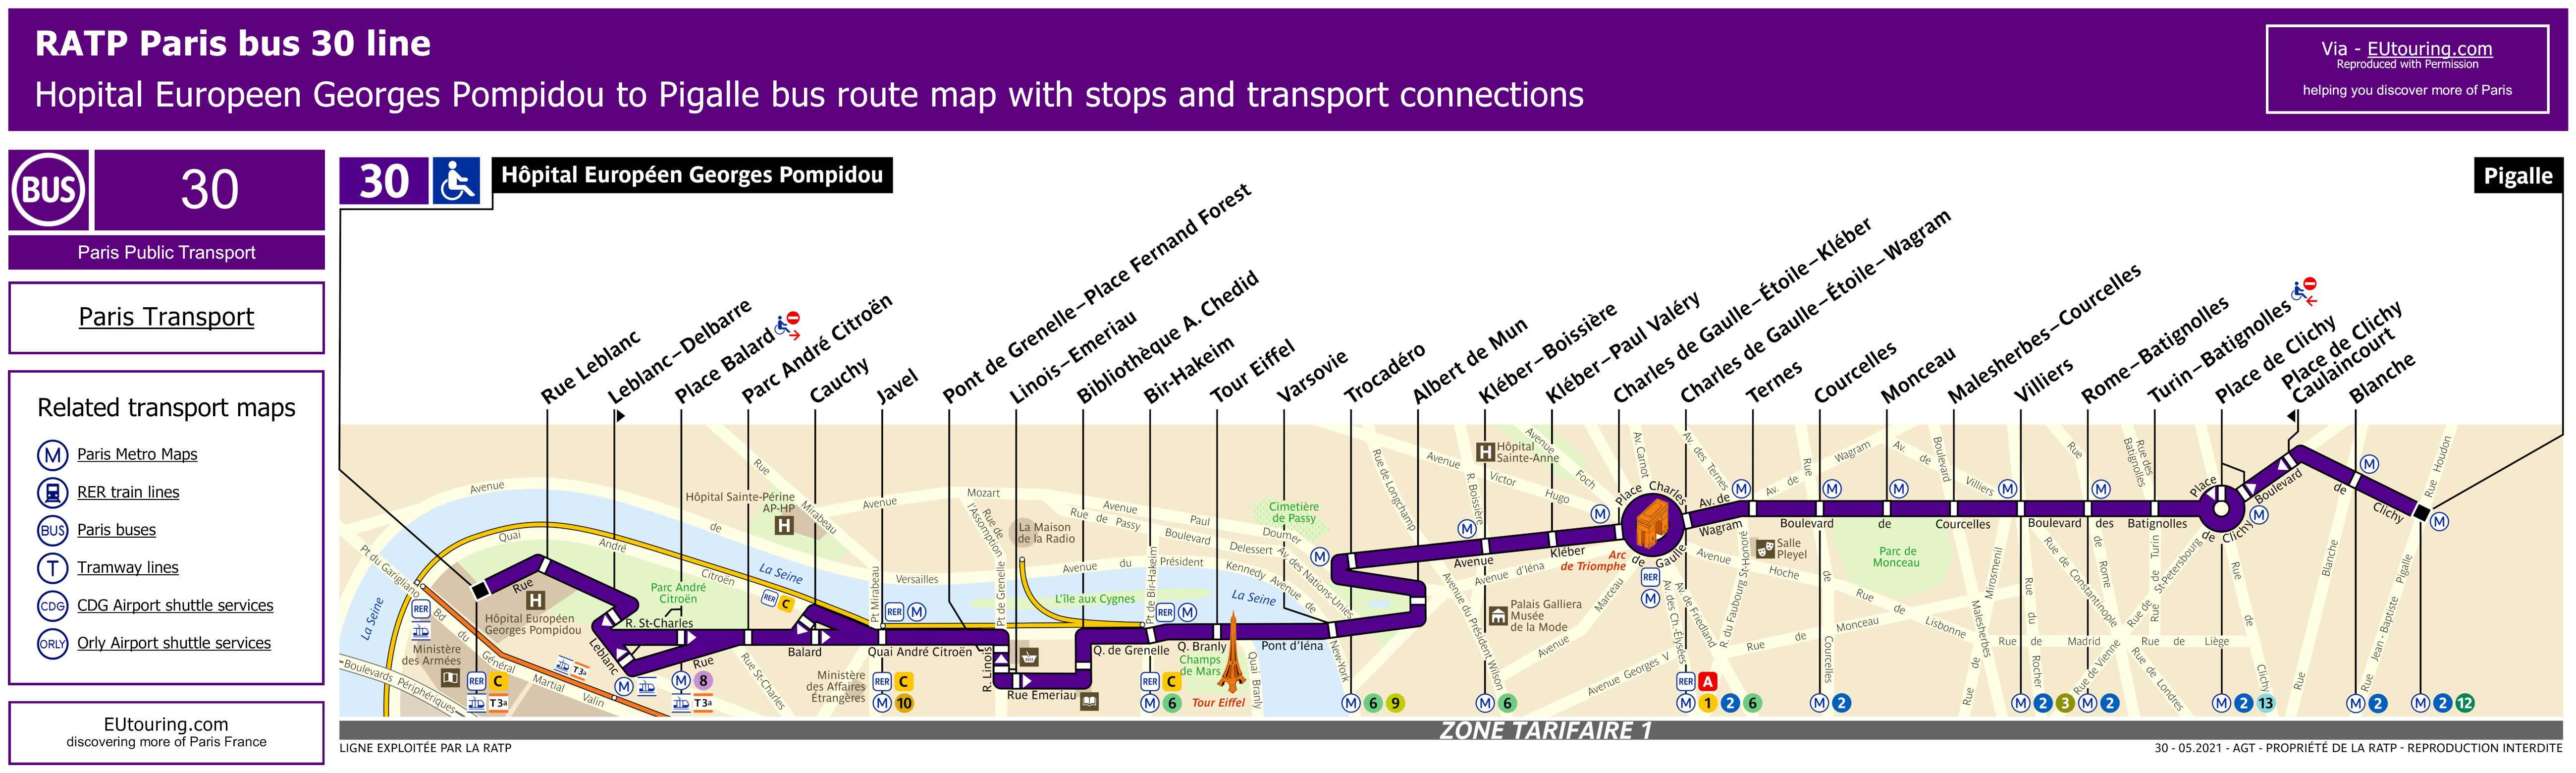 How to get to Louis Vuitton in Paris by Metro, Bus, RER, Light Rail or  Train?